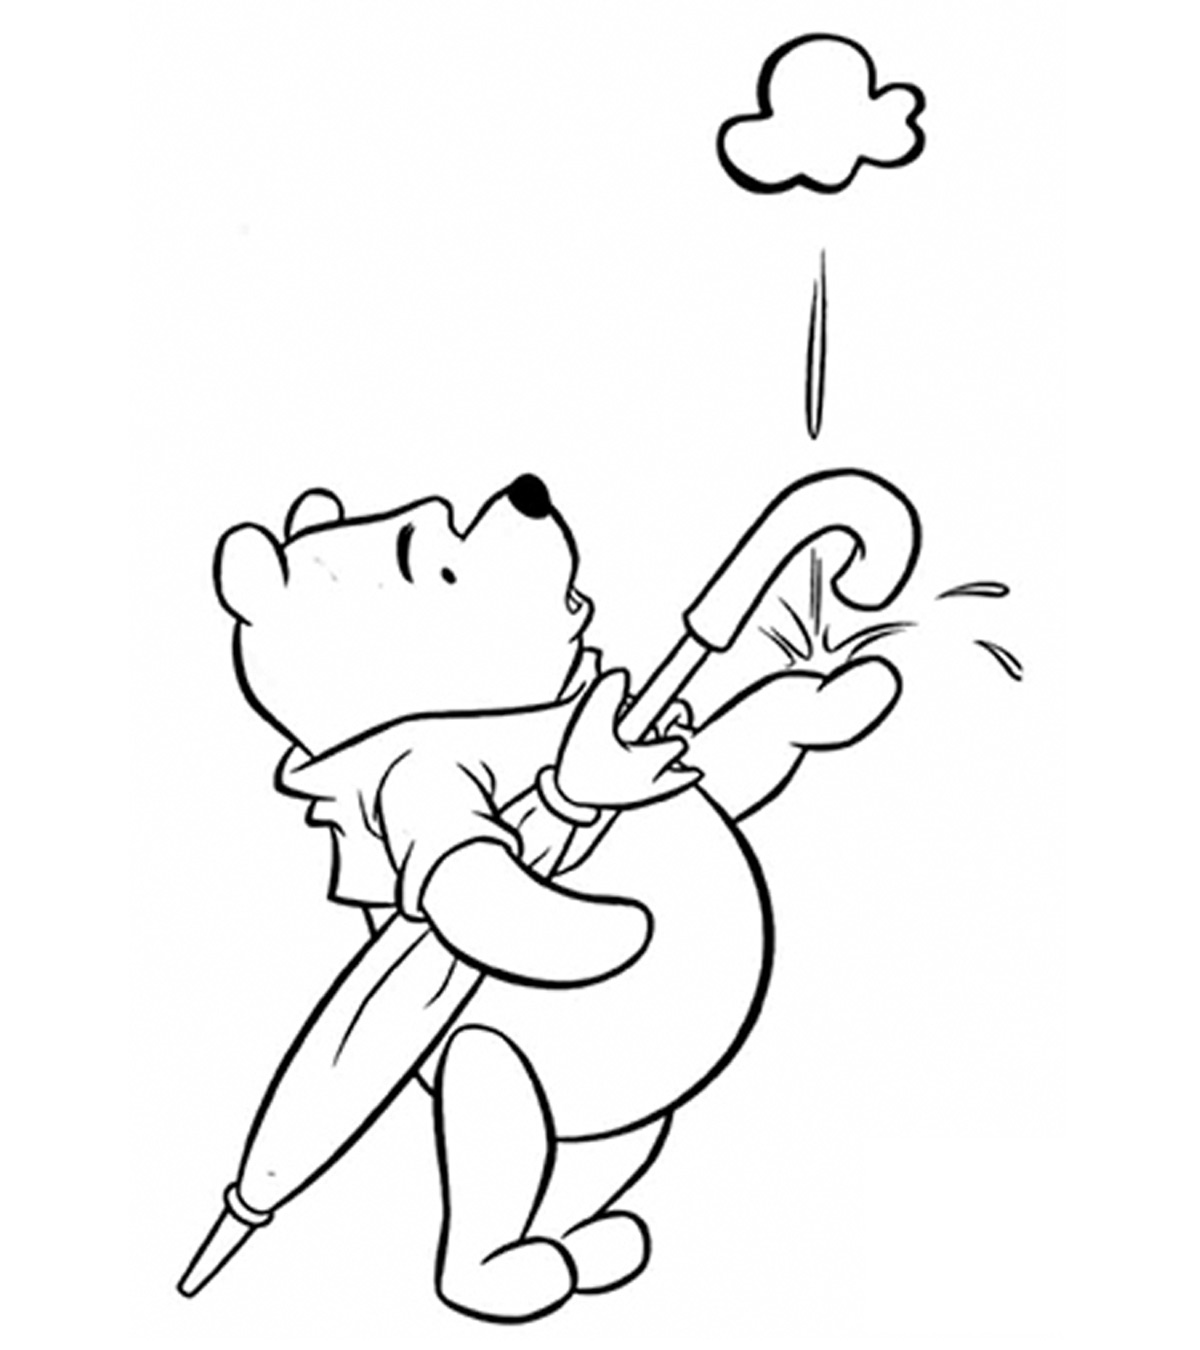 10 Cute Pooh Bear Coloring Pages For Your Little Ones